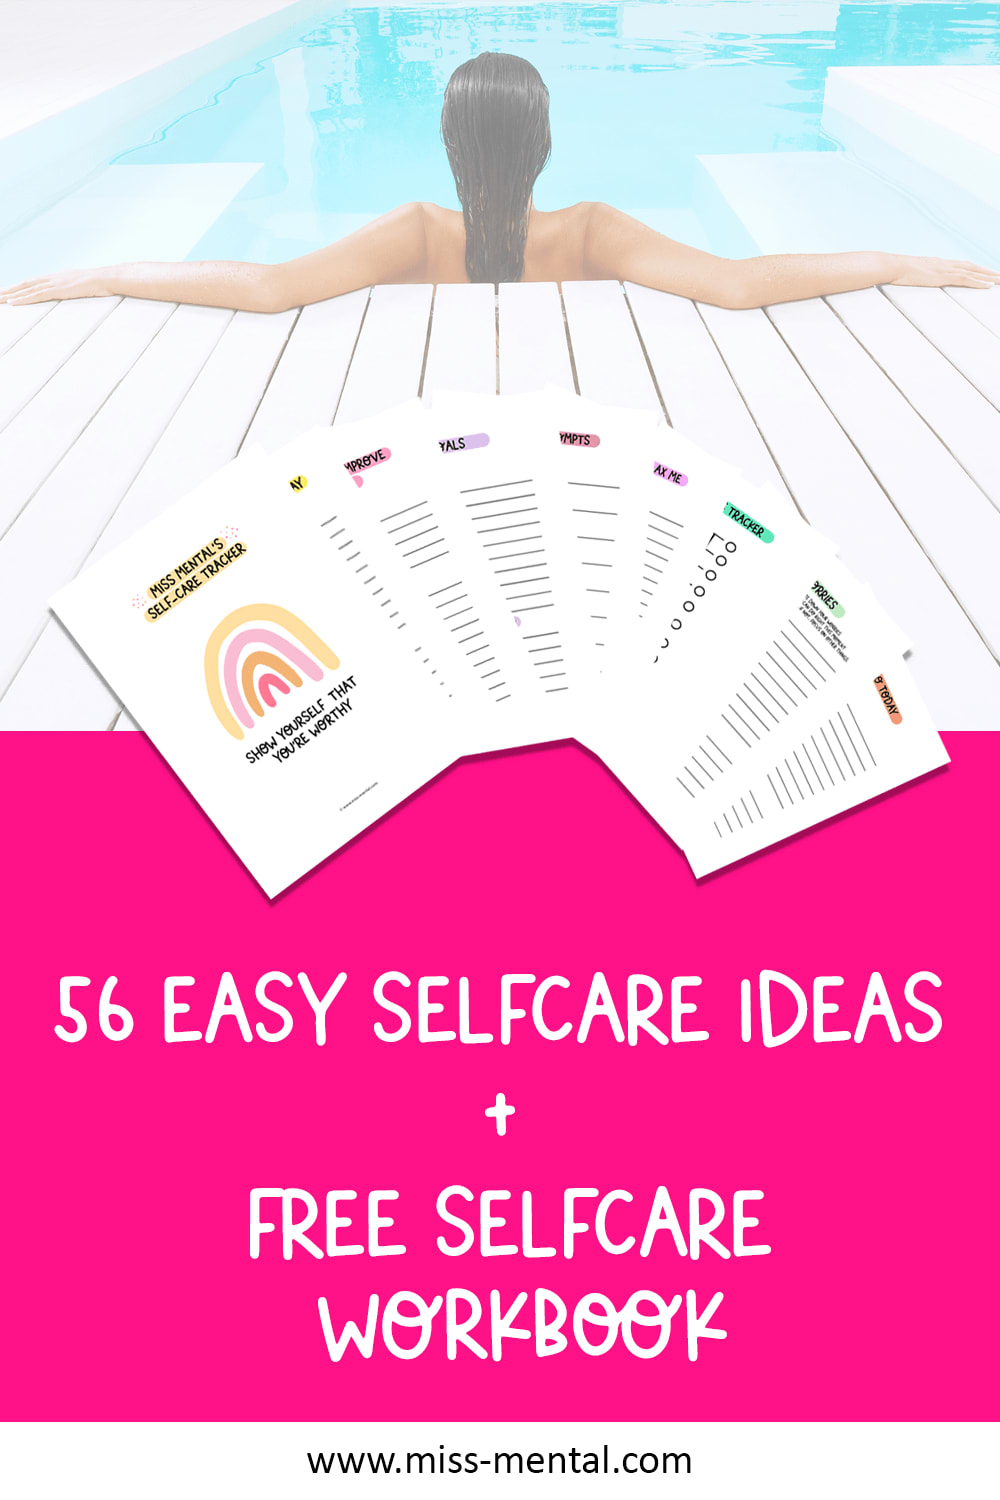 56 easy self-care ideas to improve your life + free workbook